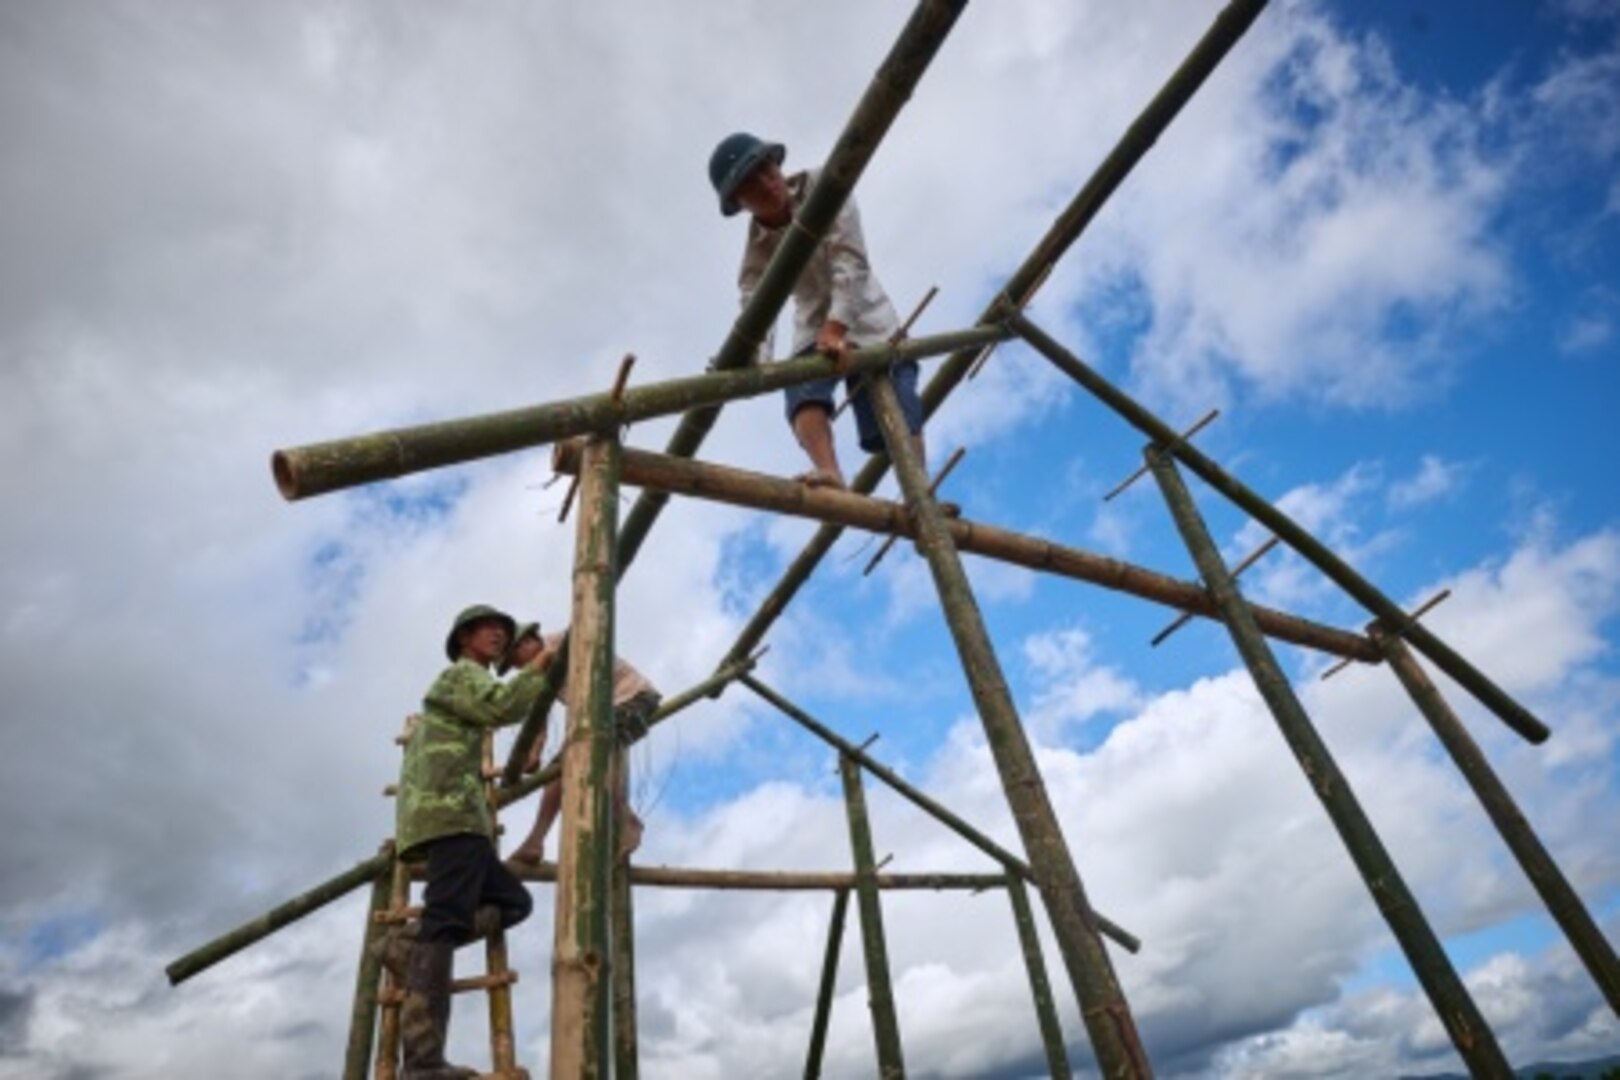 Local workers secure frames for a wet screening station at a site that will be excavated by a recovery team from the Defense POW/MIA Accounting Agency, Dien Bien province, Vietnam, Nov. 13, 2015. The DPAA mission is to provide the fullest possible accounting for our missing personnel to their families and the nation. (DoD photo by Staff Sgt. Kathrine Dodd, USAF/RELEASED)